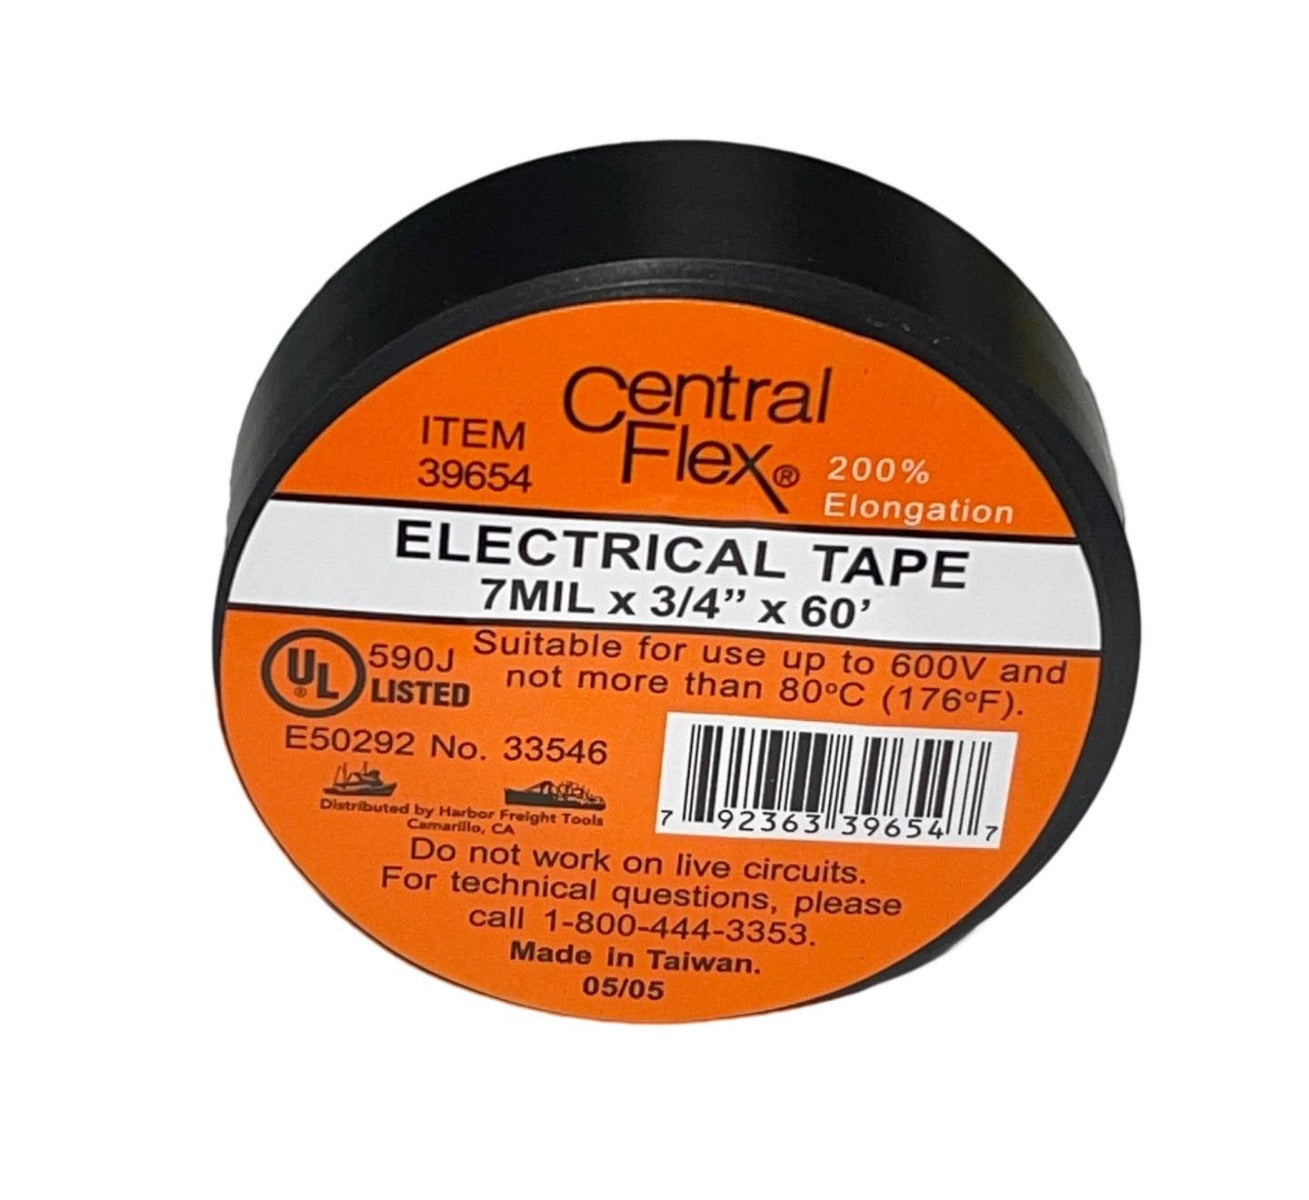 PVC Electrical Tape, 60 ft. X 3/4"